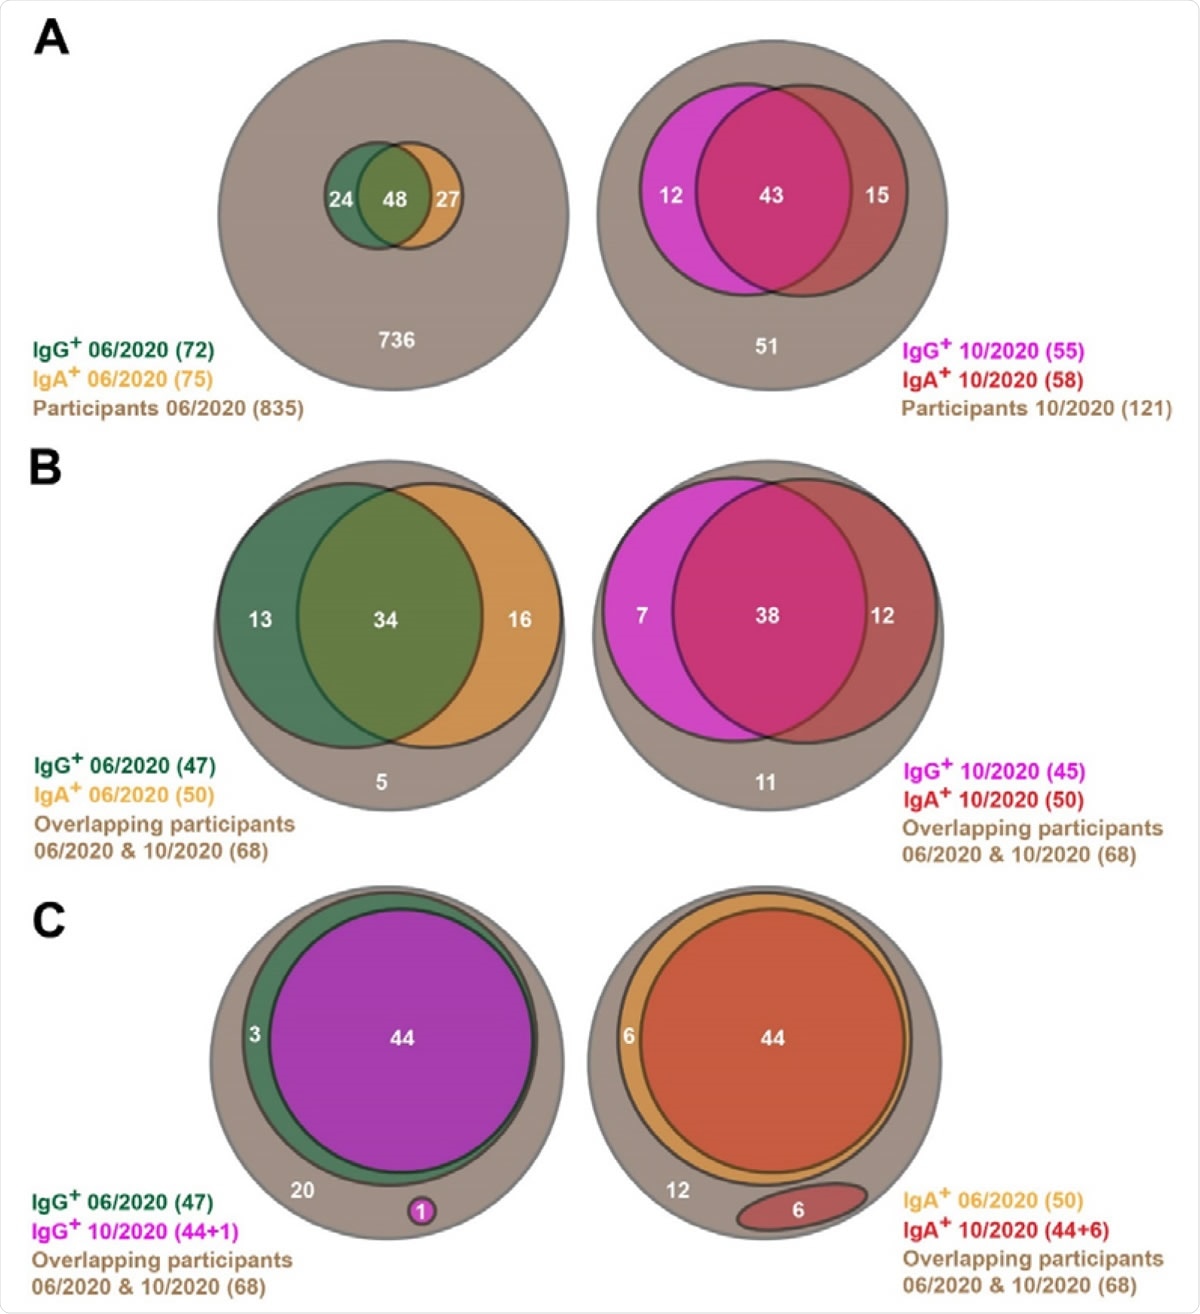 Venn diagrams showing SARS-CoV-2-specific antibody prevalence in the pilot (06/2020) and the follow-up (10/2020) studies. (A) All participants of both studies are shown here. (B, C) Only the participants are considered here, which are involved in both the pilot and follow-up studies.